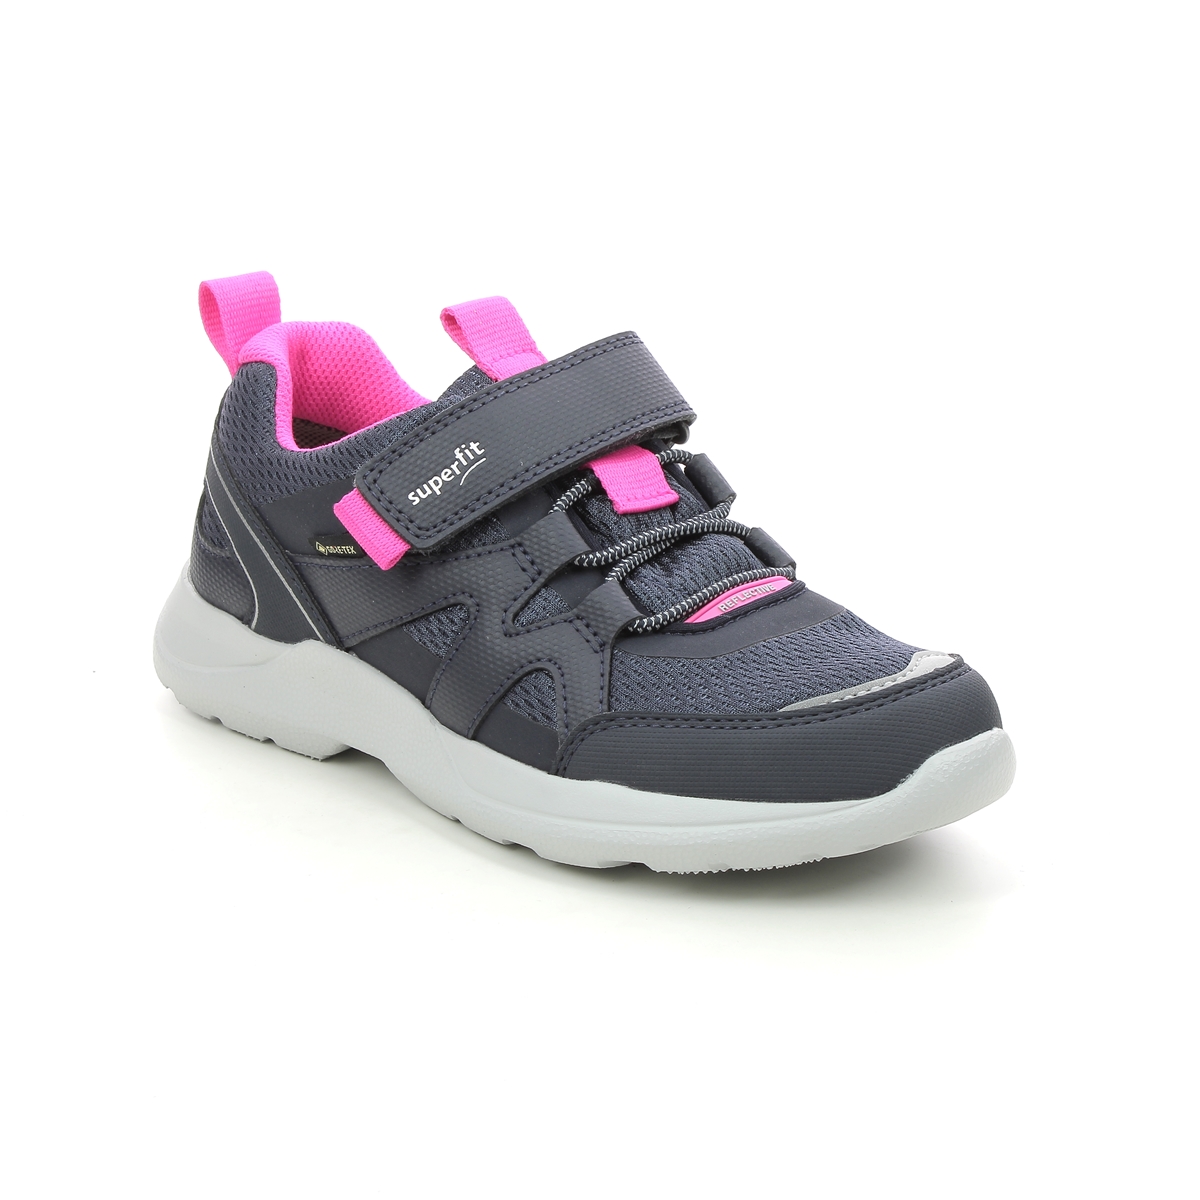 Superfit Rush Jnr G Gtx Navy Pink Kids girls trainers 1006219-8020 in a Plain  in Size 37